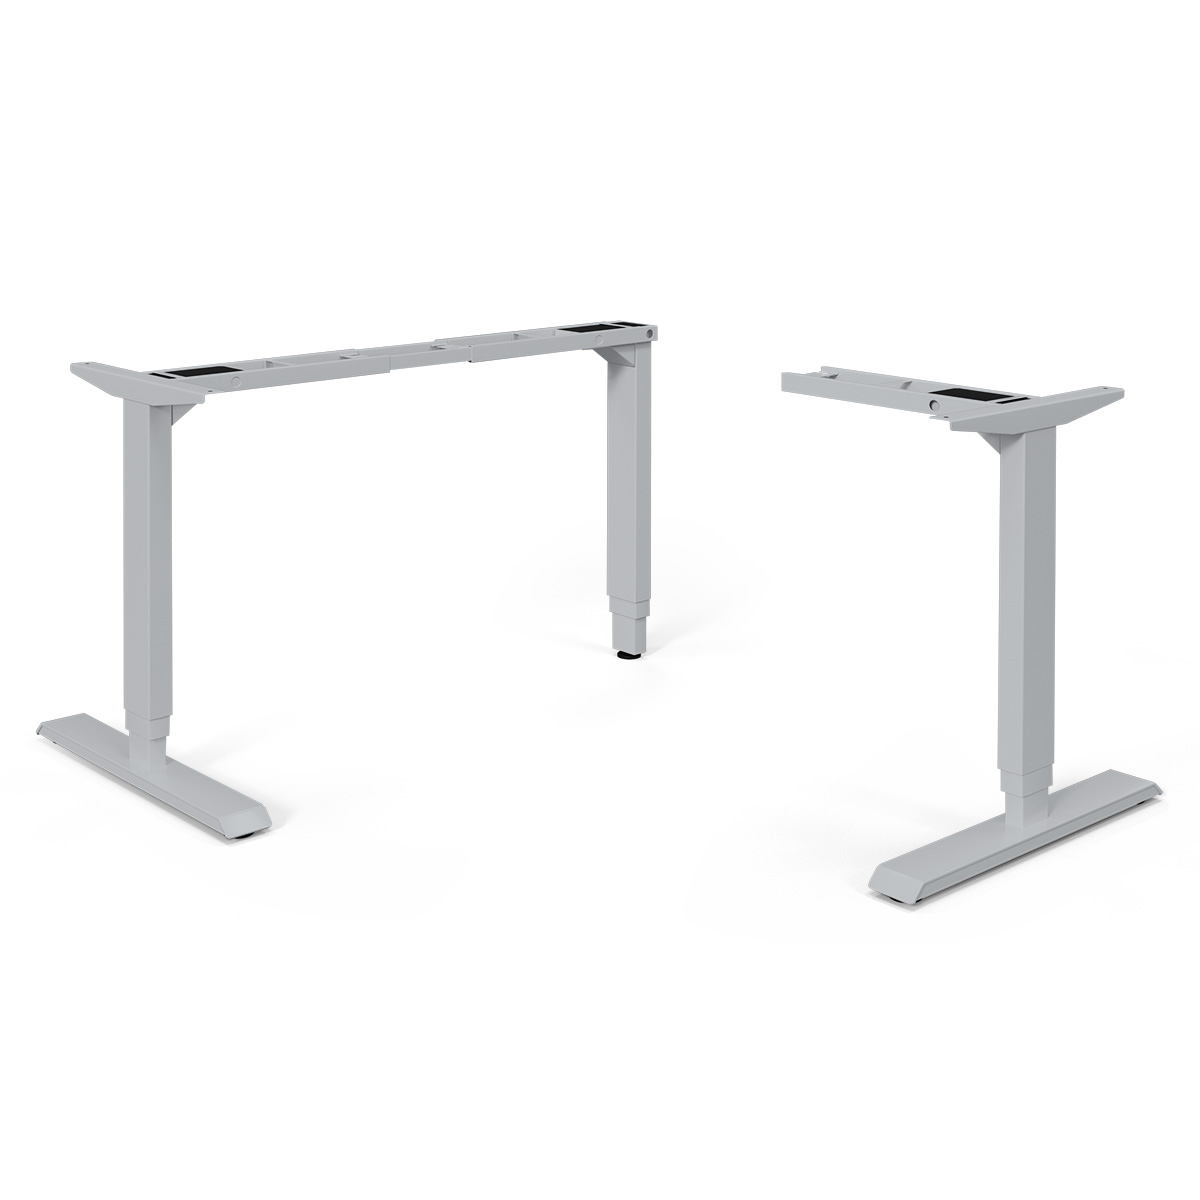 HAT Collective - 3-Leg, 3-Stage Height-Adjustable Table Base